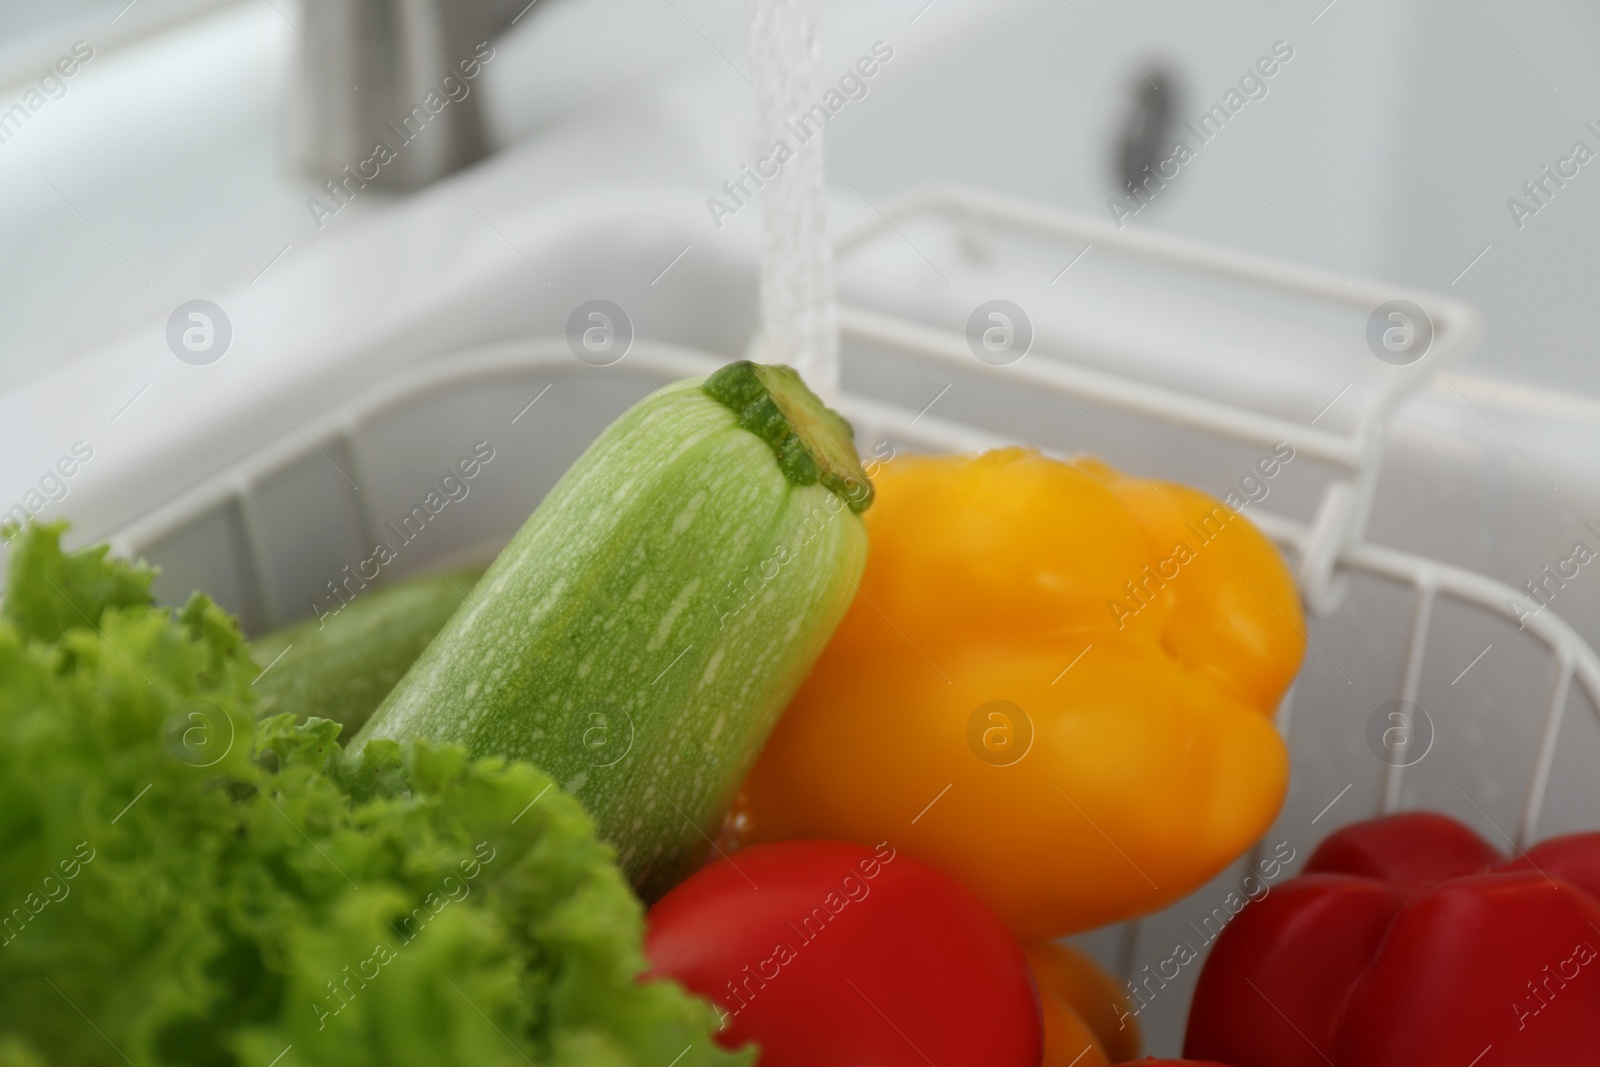 Photo of Many fresh ripe vegetables under tap water in kitchen sink, closeup